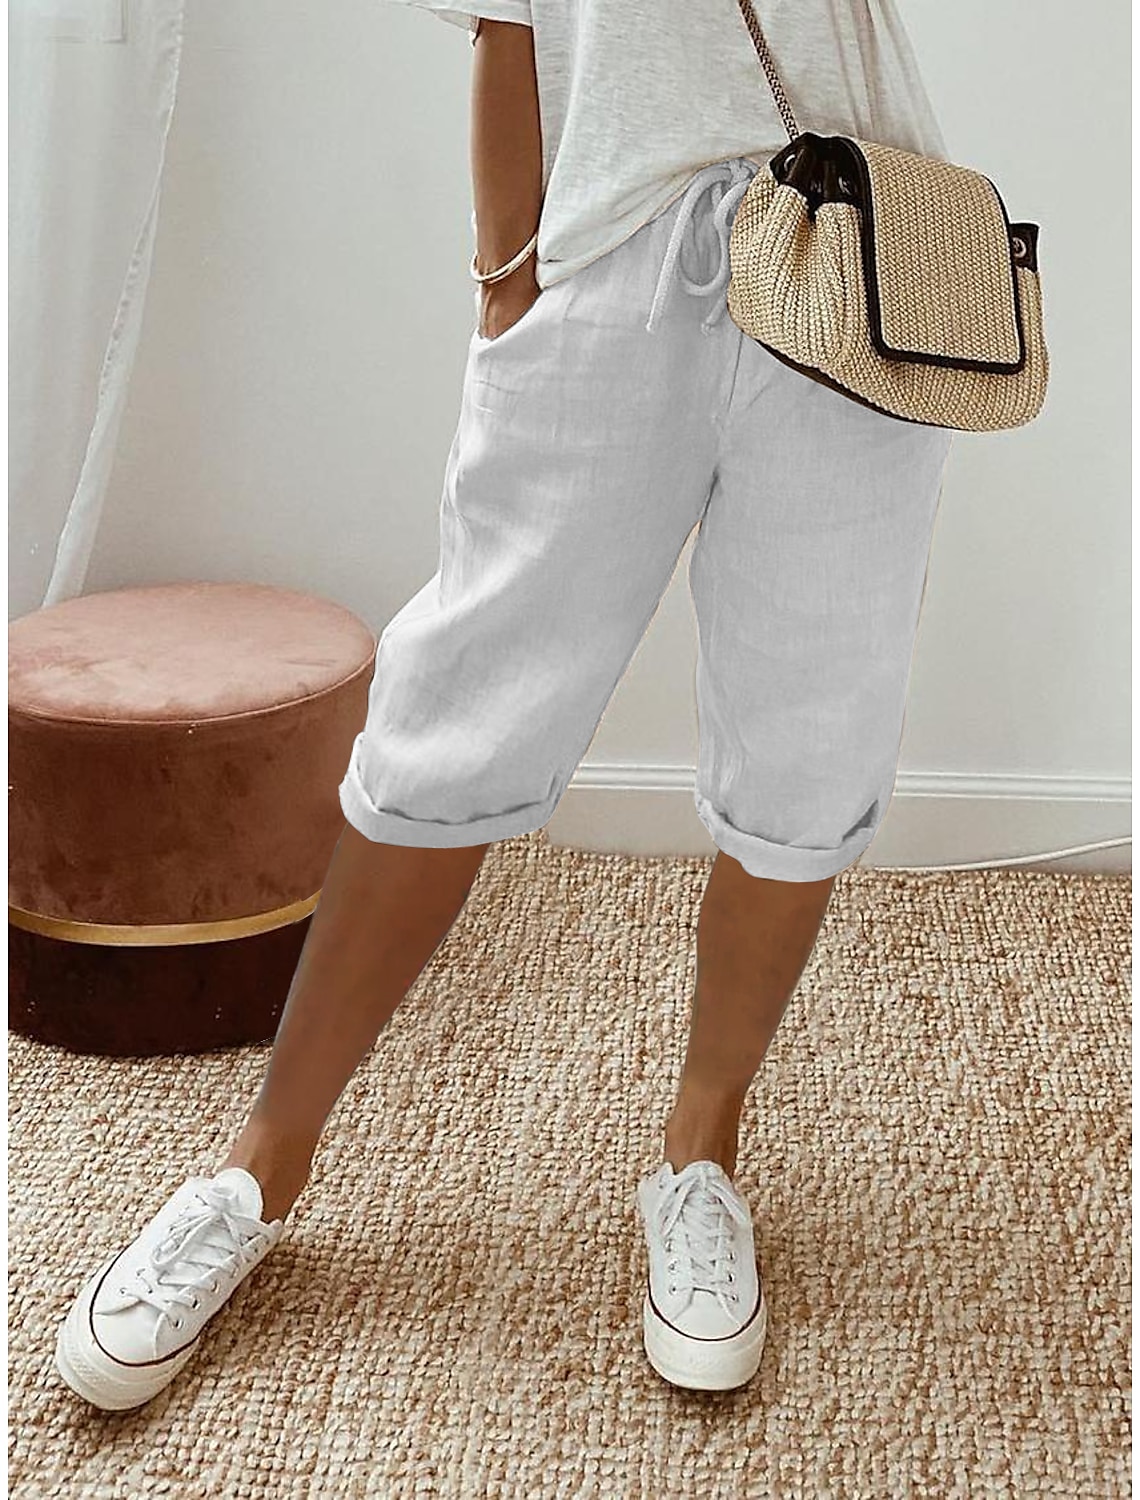 Women's Linen Pants Baggy Knee Length Pocket Baggy Vacation Casual Daily Casual Daily Wear Robin's Egg Blue White / White S M Autumn / Fall Spring & Summer 2023 - US $16.99 –P2